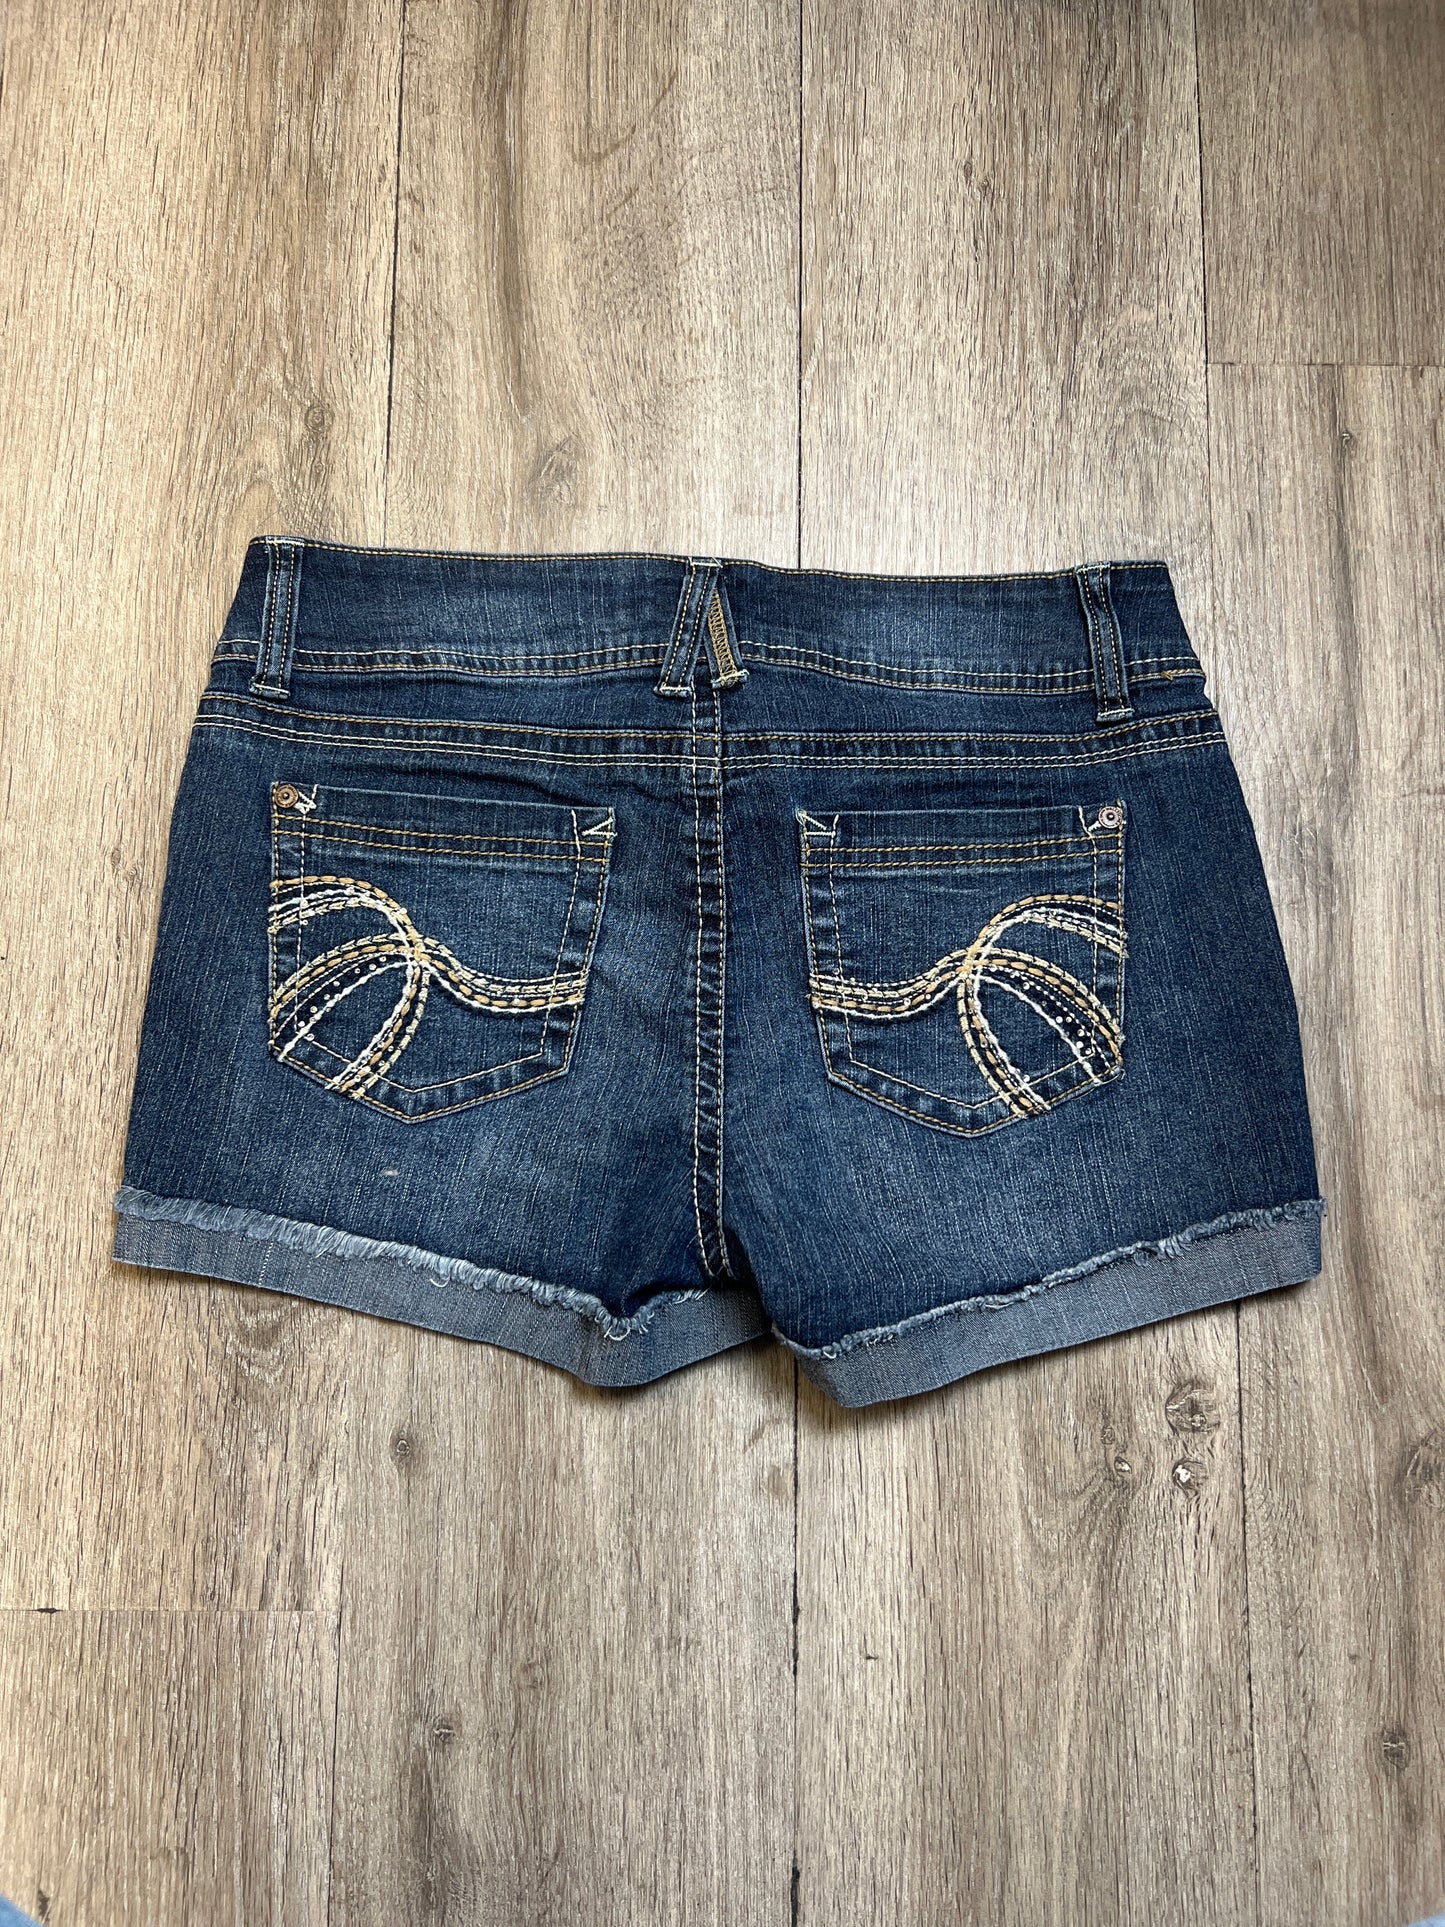 Shorts By Wallflower  Size: S